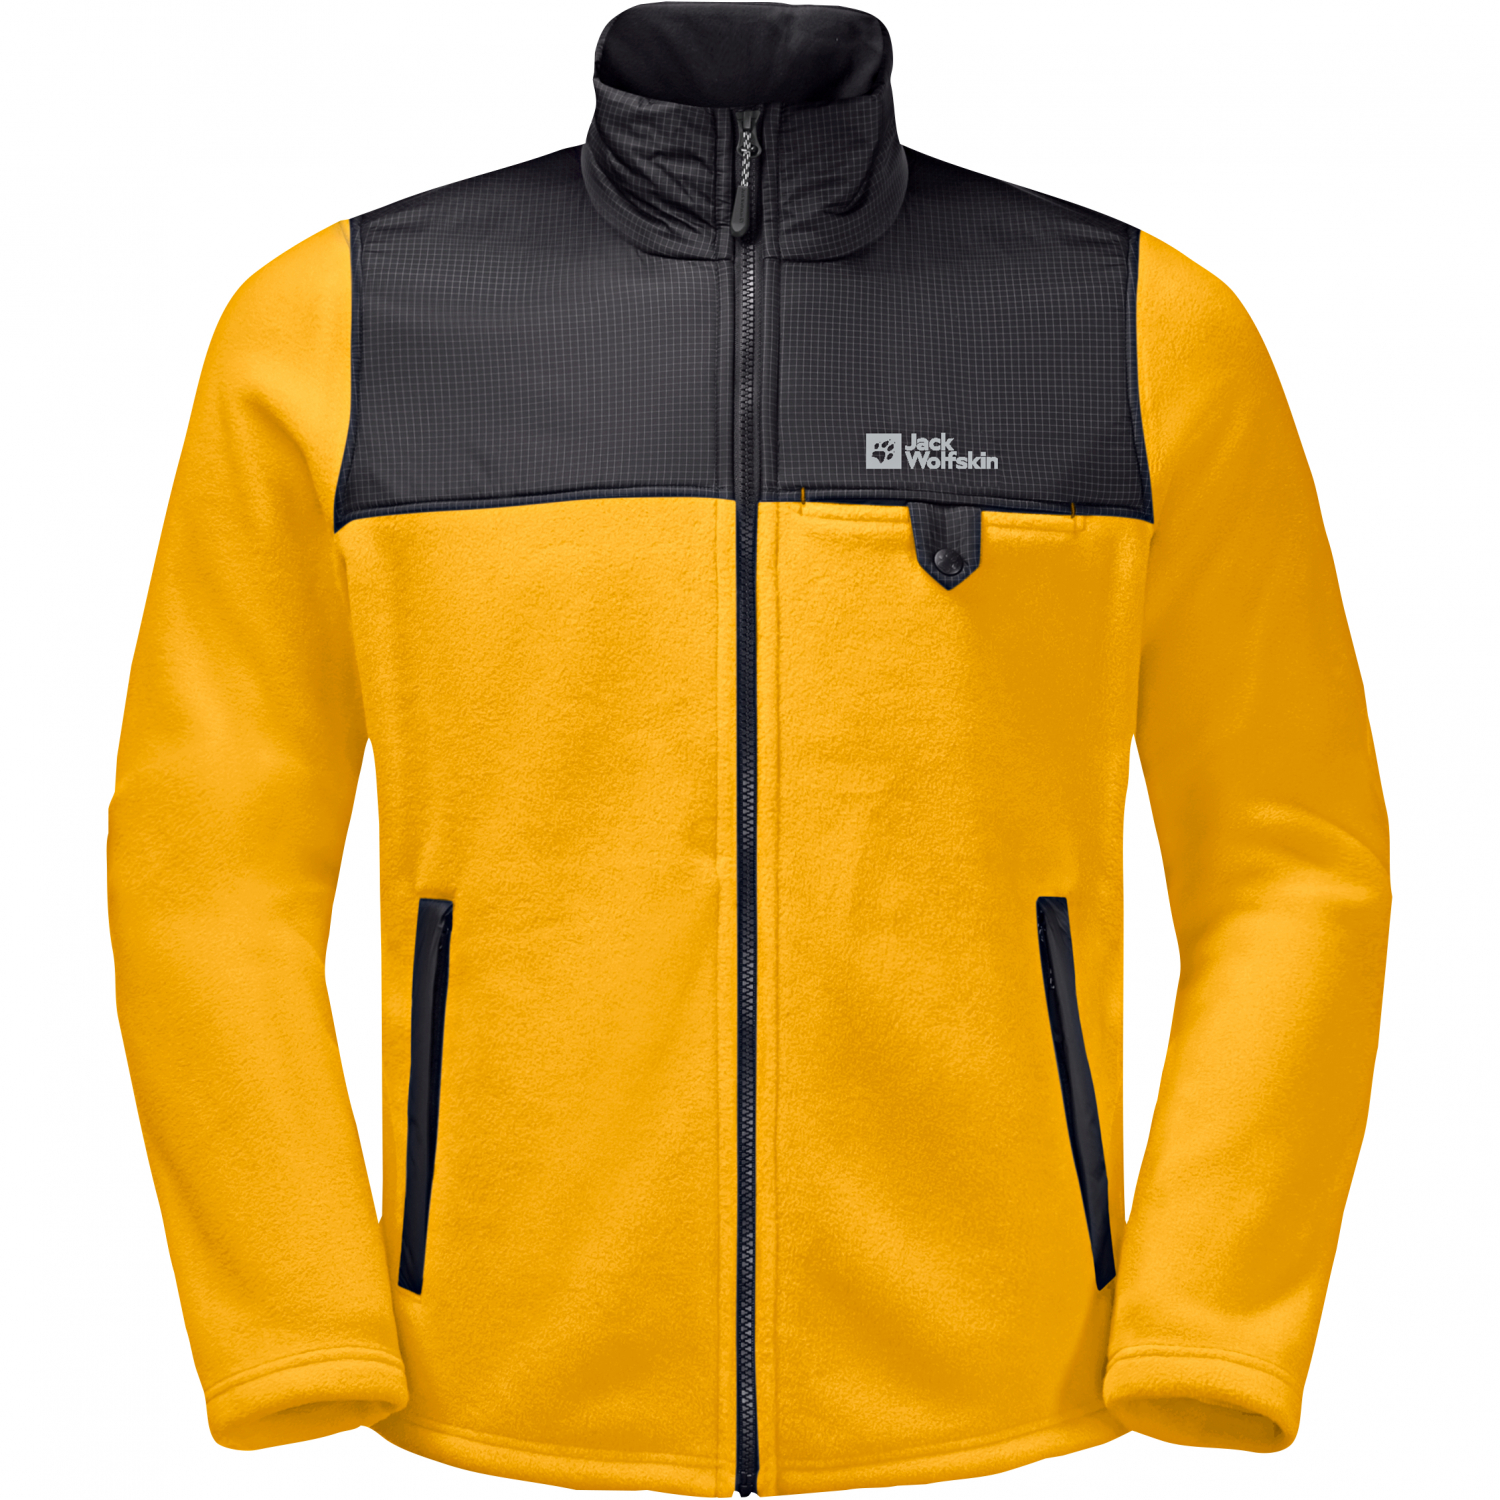 Jack Wolfskin Mens DNA Grizzly fleece jacket (yellow/black) at low prices |  Askari Fishing Shop